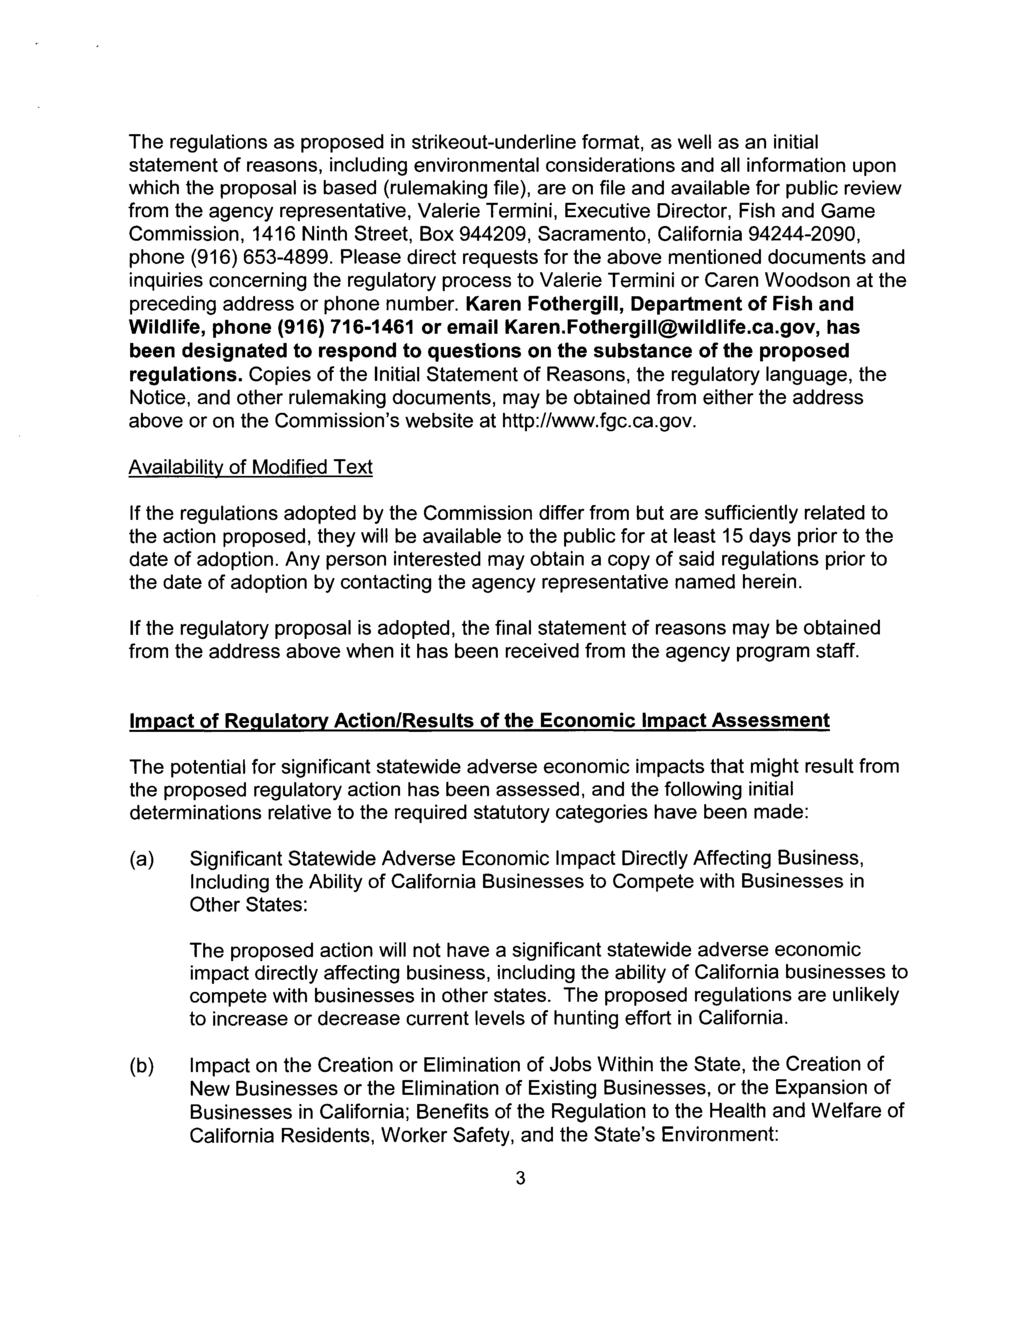 Page 4 of 12 The regulations as proposed in strikeout-underline format, as well as an initial statement of reasons, including environmental considerations and all information upon which the proposal